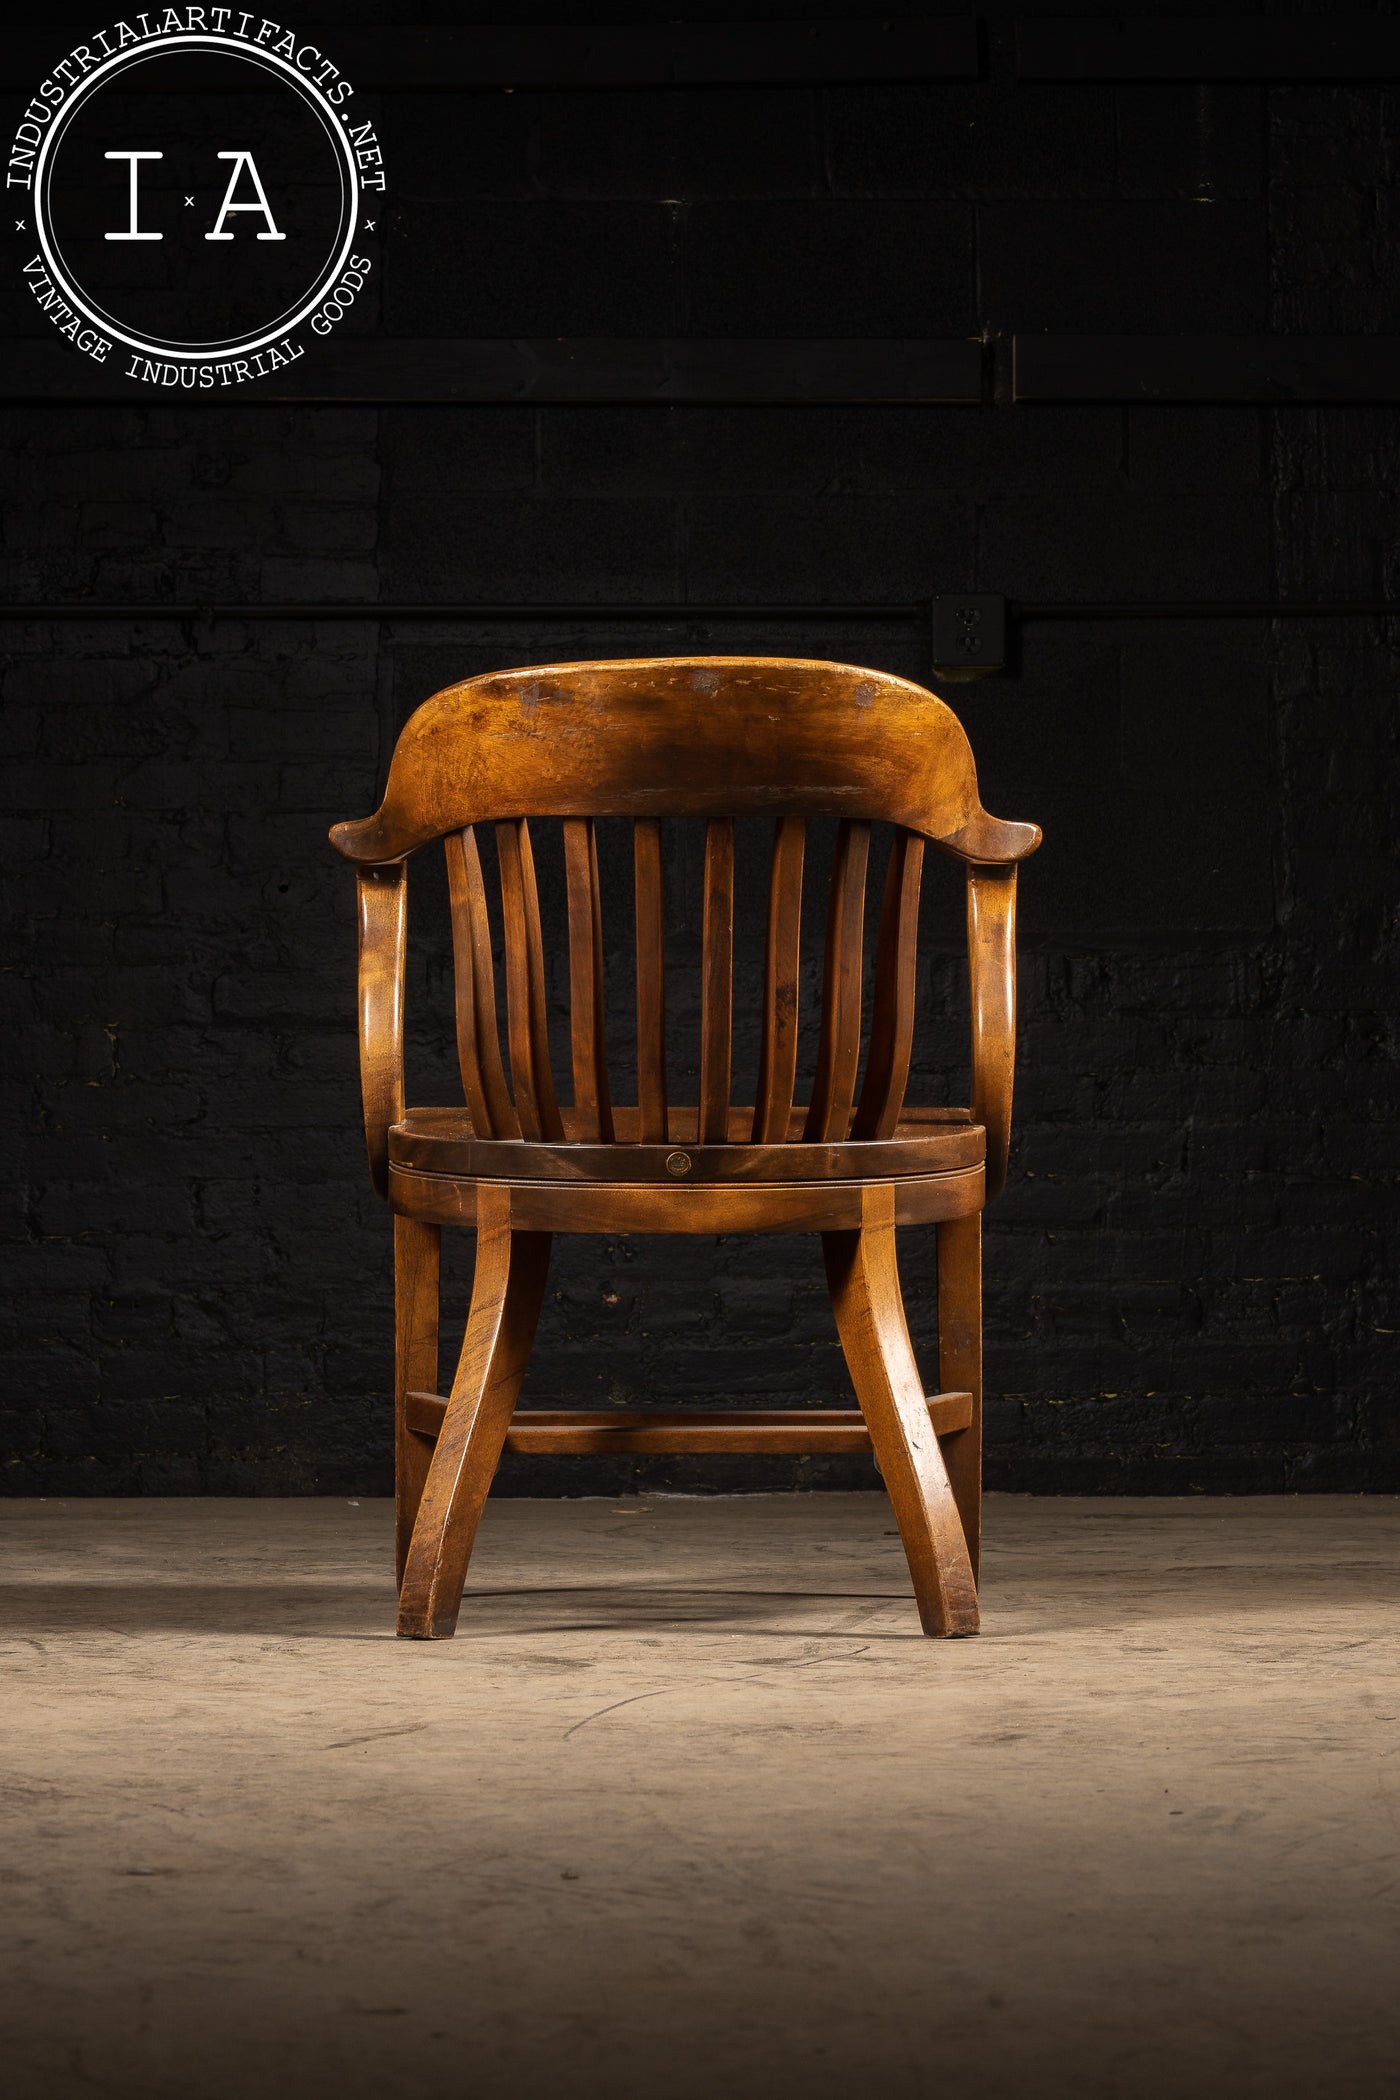 Vintage Sikes Courthouse Chair